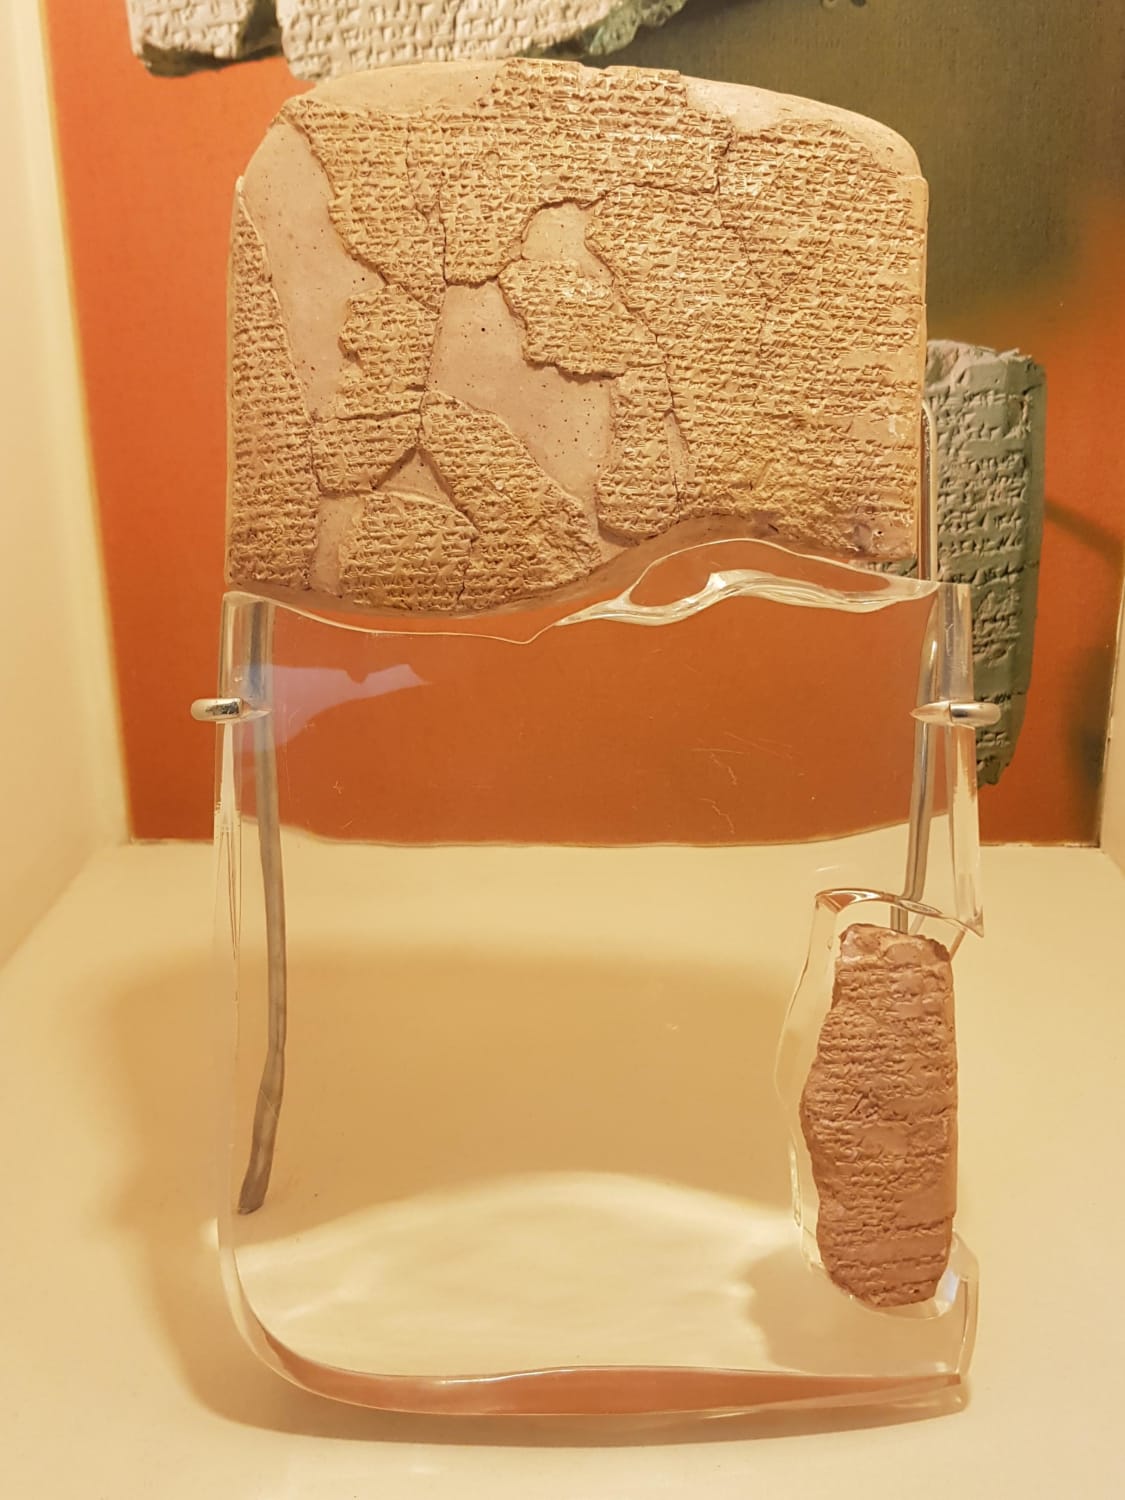 The Treaty of Kadesh, also known as the Eternal Treaty, is the oldest known surviving peace treaty. It was signed between Ramesses II of Egypt and Ḫattušili III of the Hittites in 1271 BC, 16 years after the battle of Kadesh